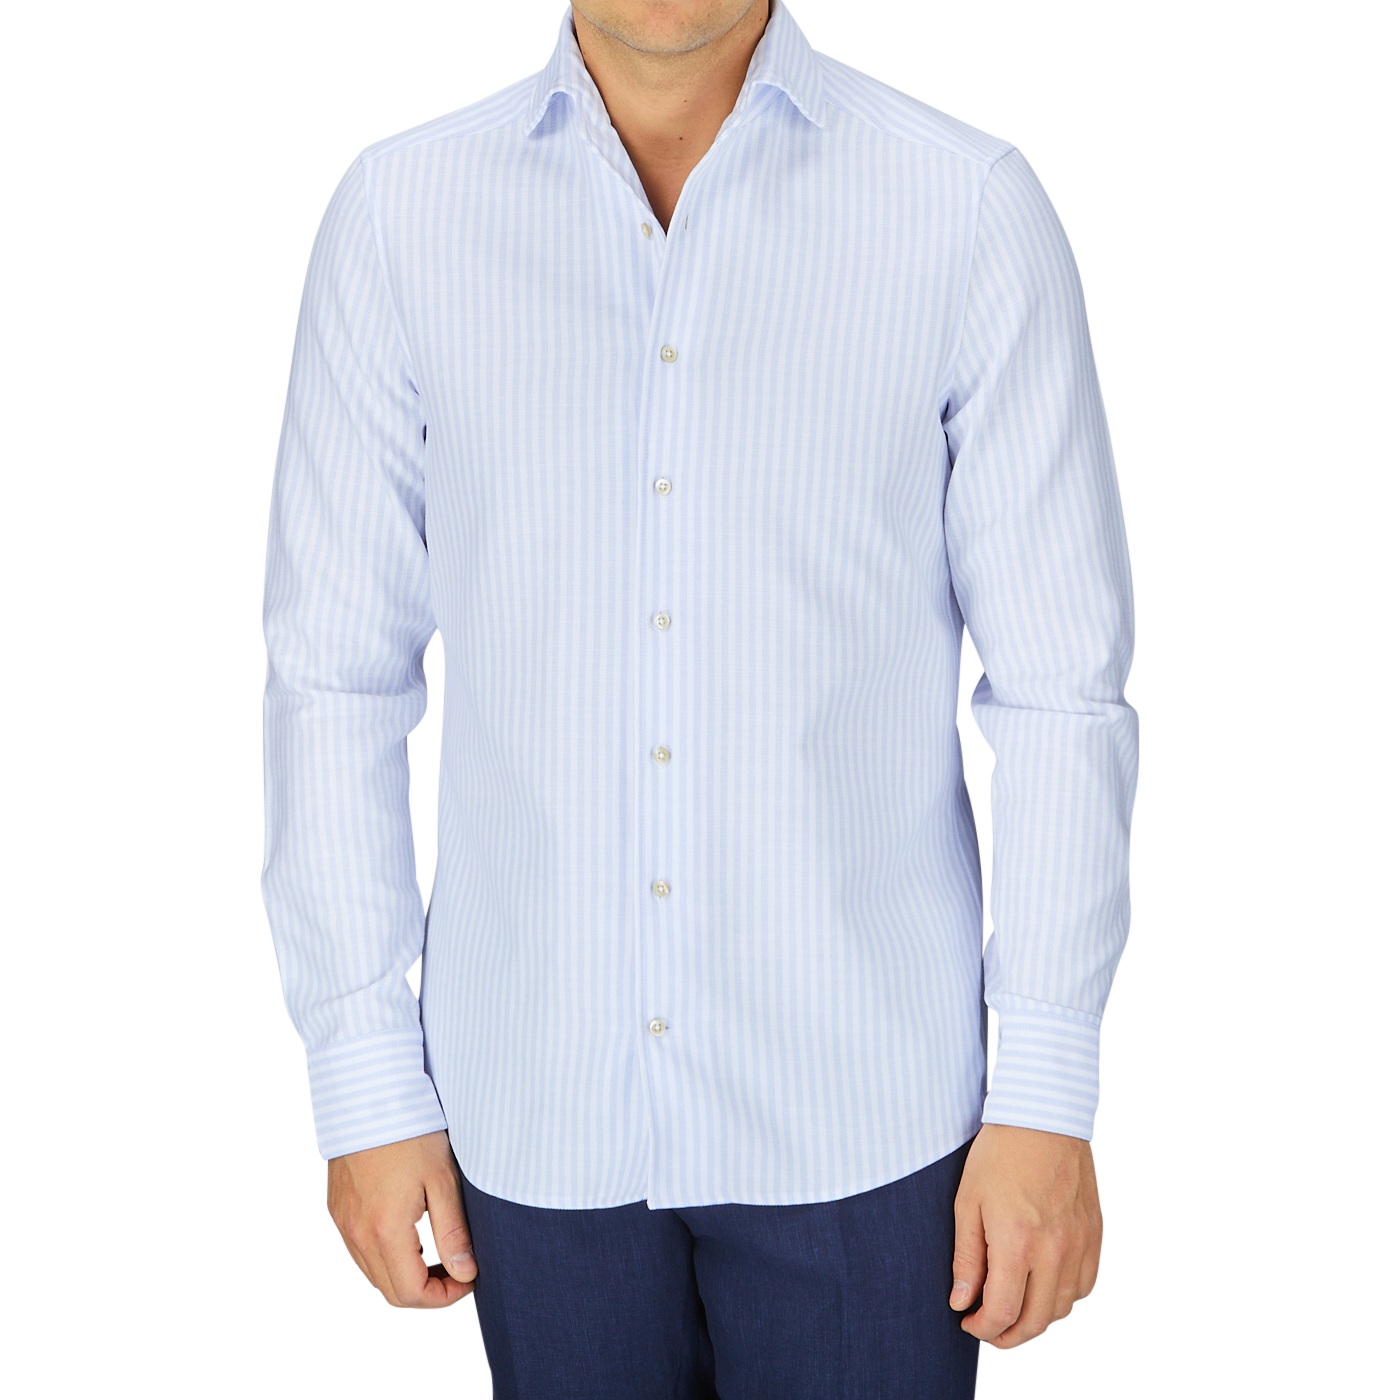 Man in a Stenströms Blue White Striped Cotton Slimline shirt with a cut-away collar and dark trousers.